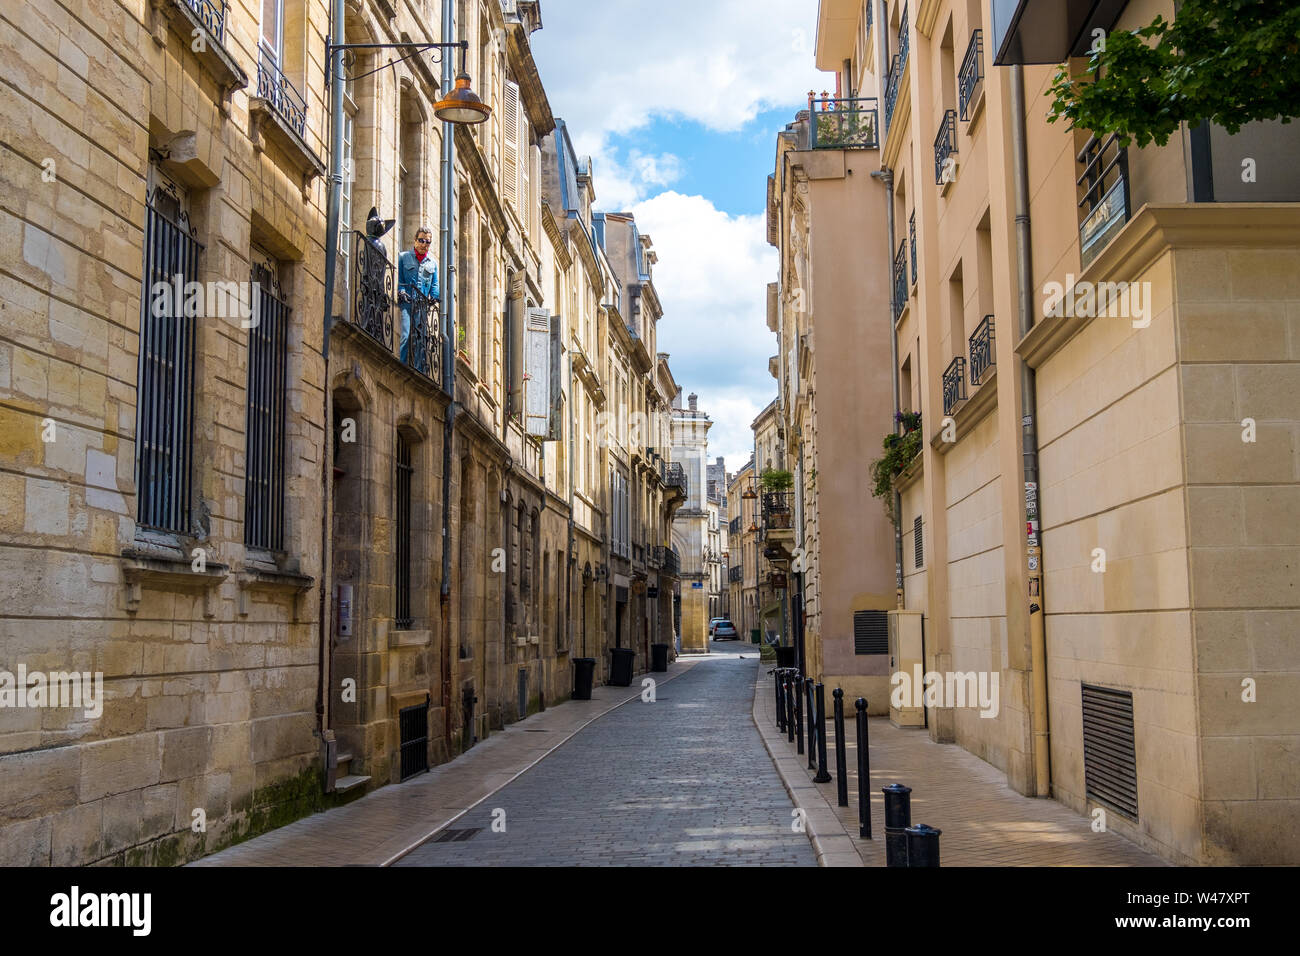 Bordeaux, France - May 5, 2019: Mannequin of a black cat and a man on the balcony of an residential building in historical center of Bordeaux, France Stock Photo